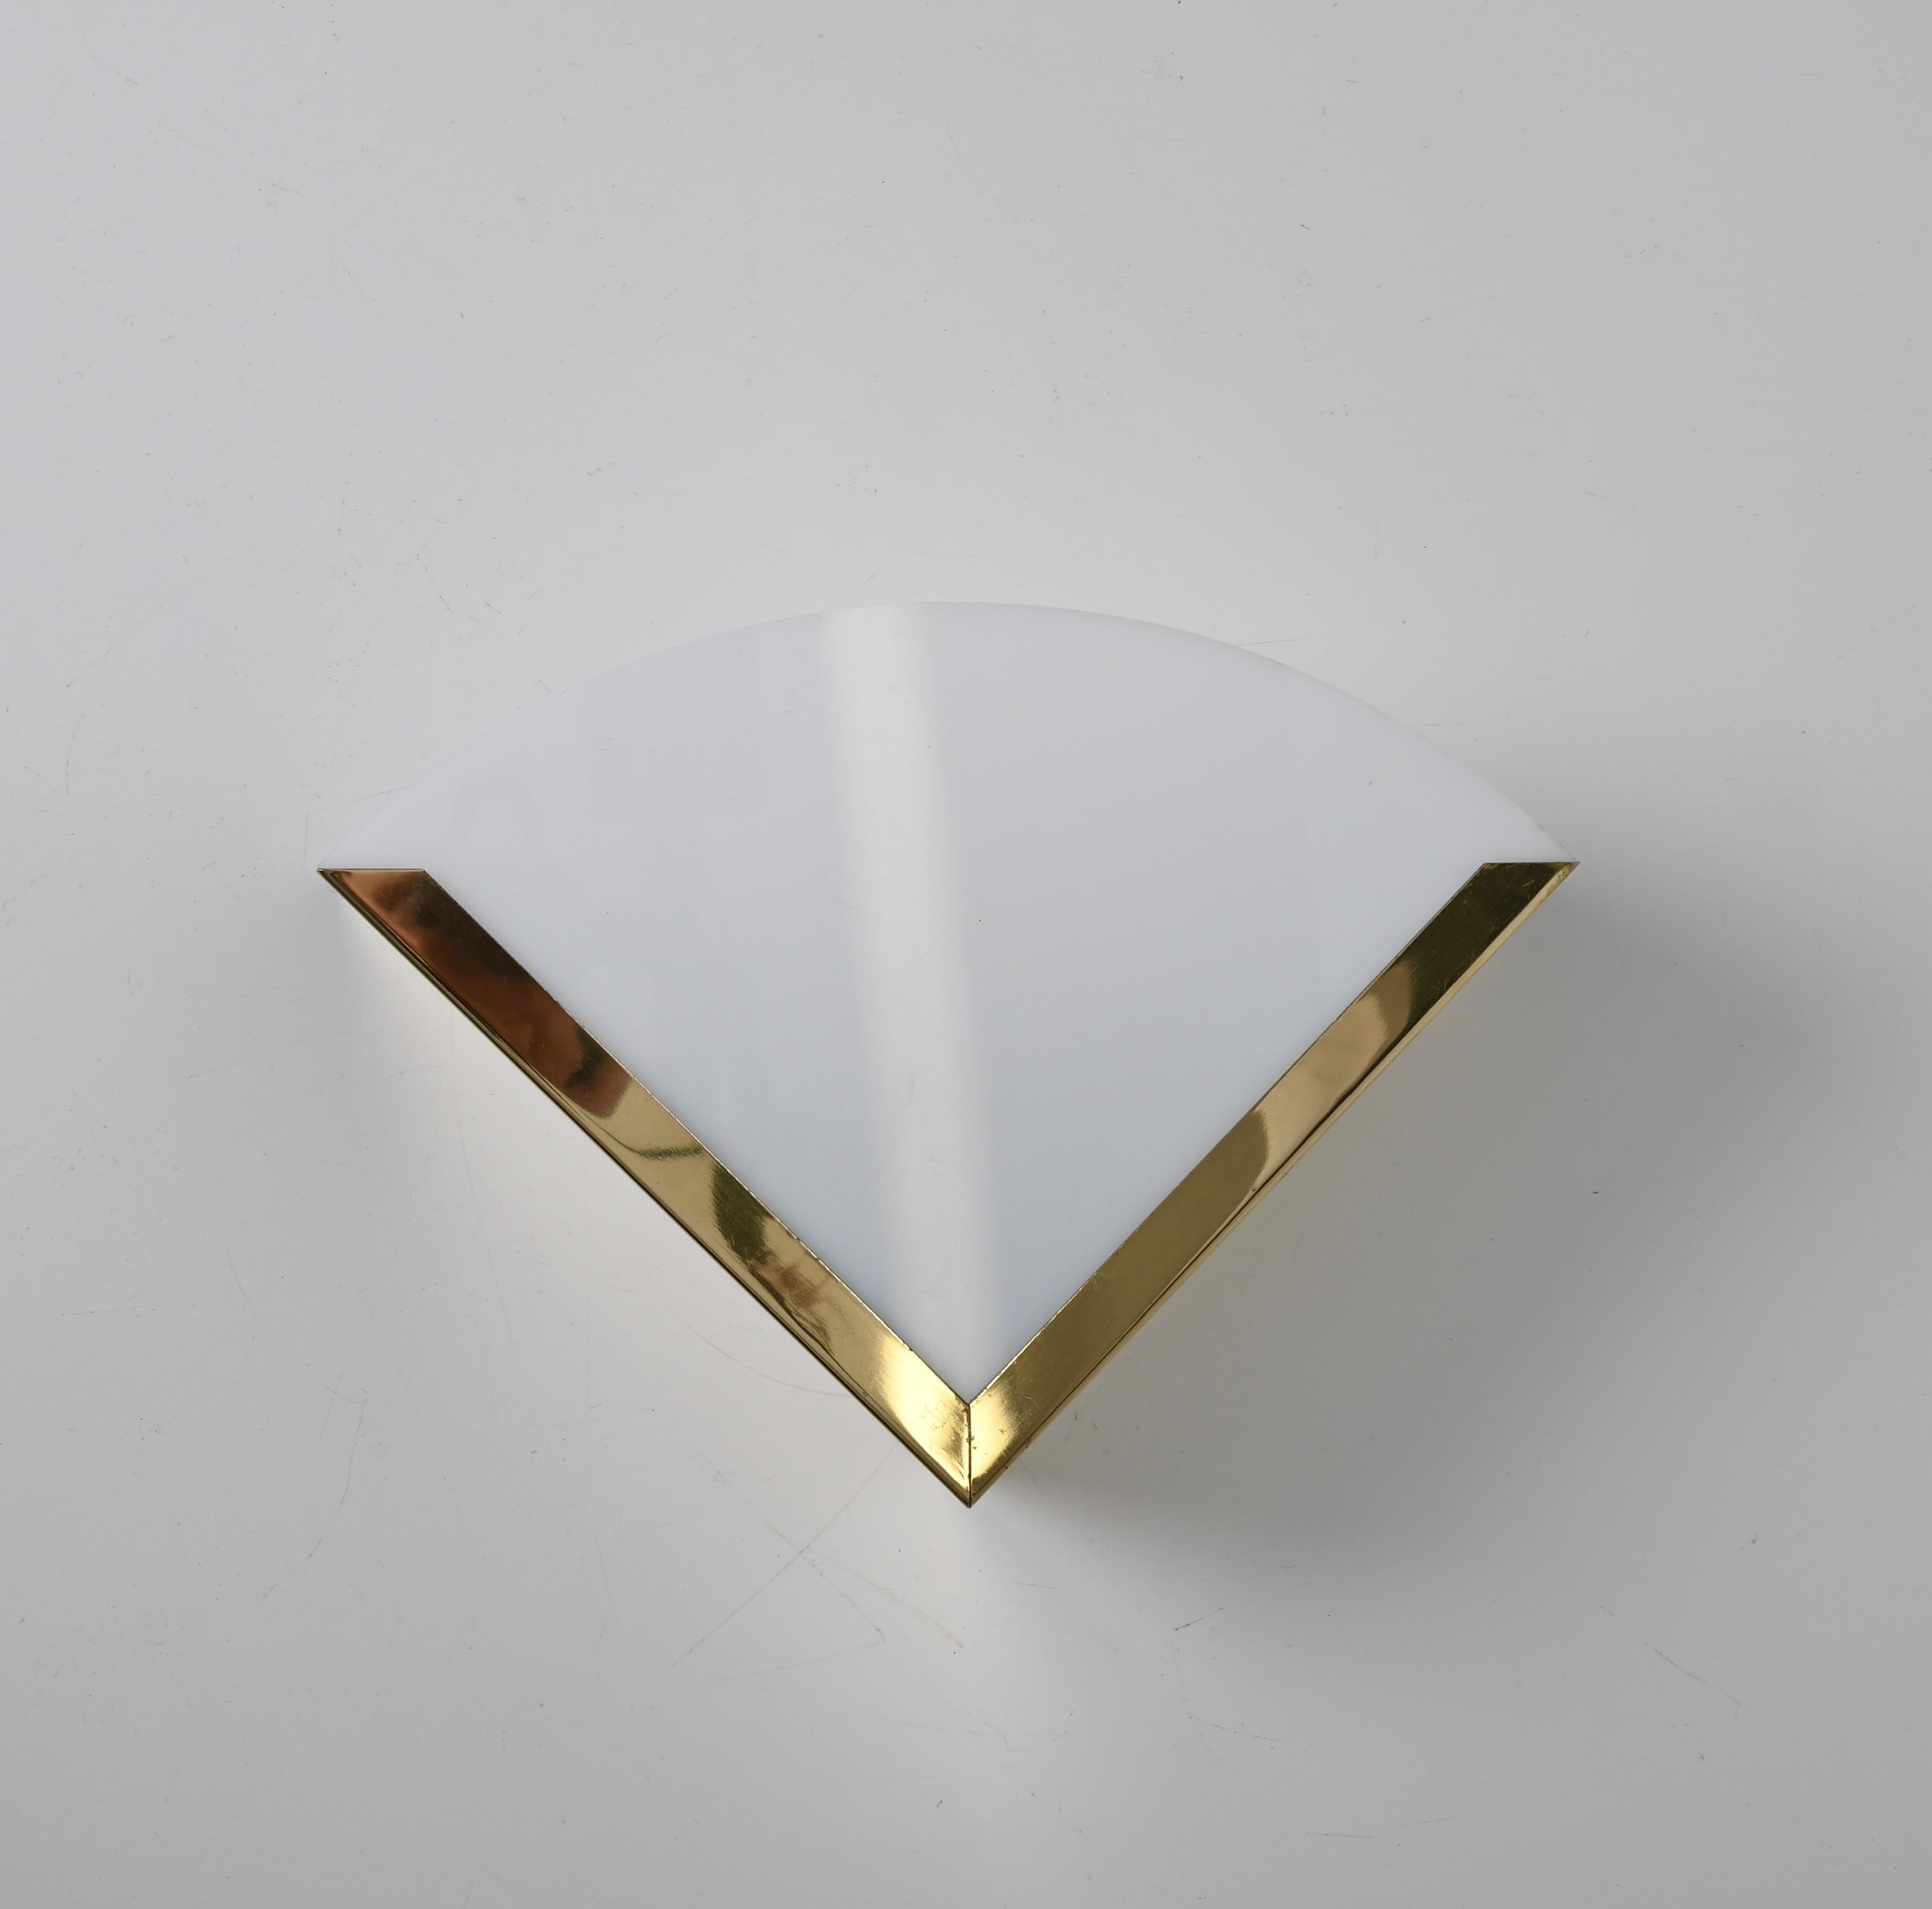 Hand-Crafted Italian Triangular Sconces in Brass and White Perspex, Italy 1970s For Sale